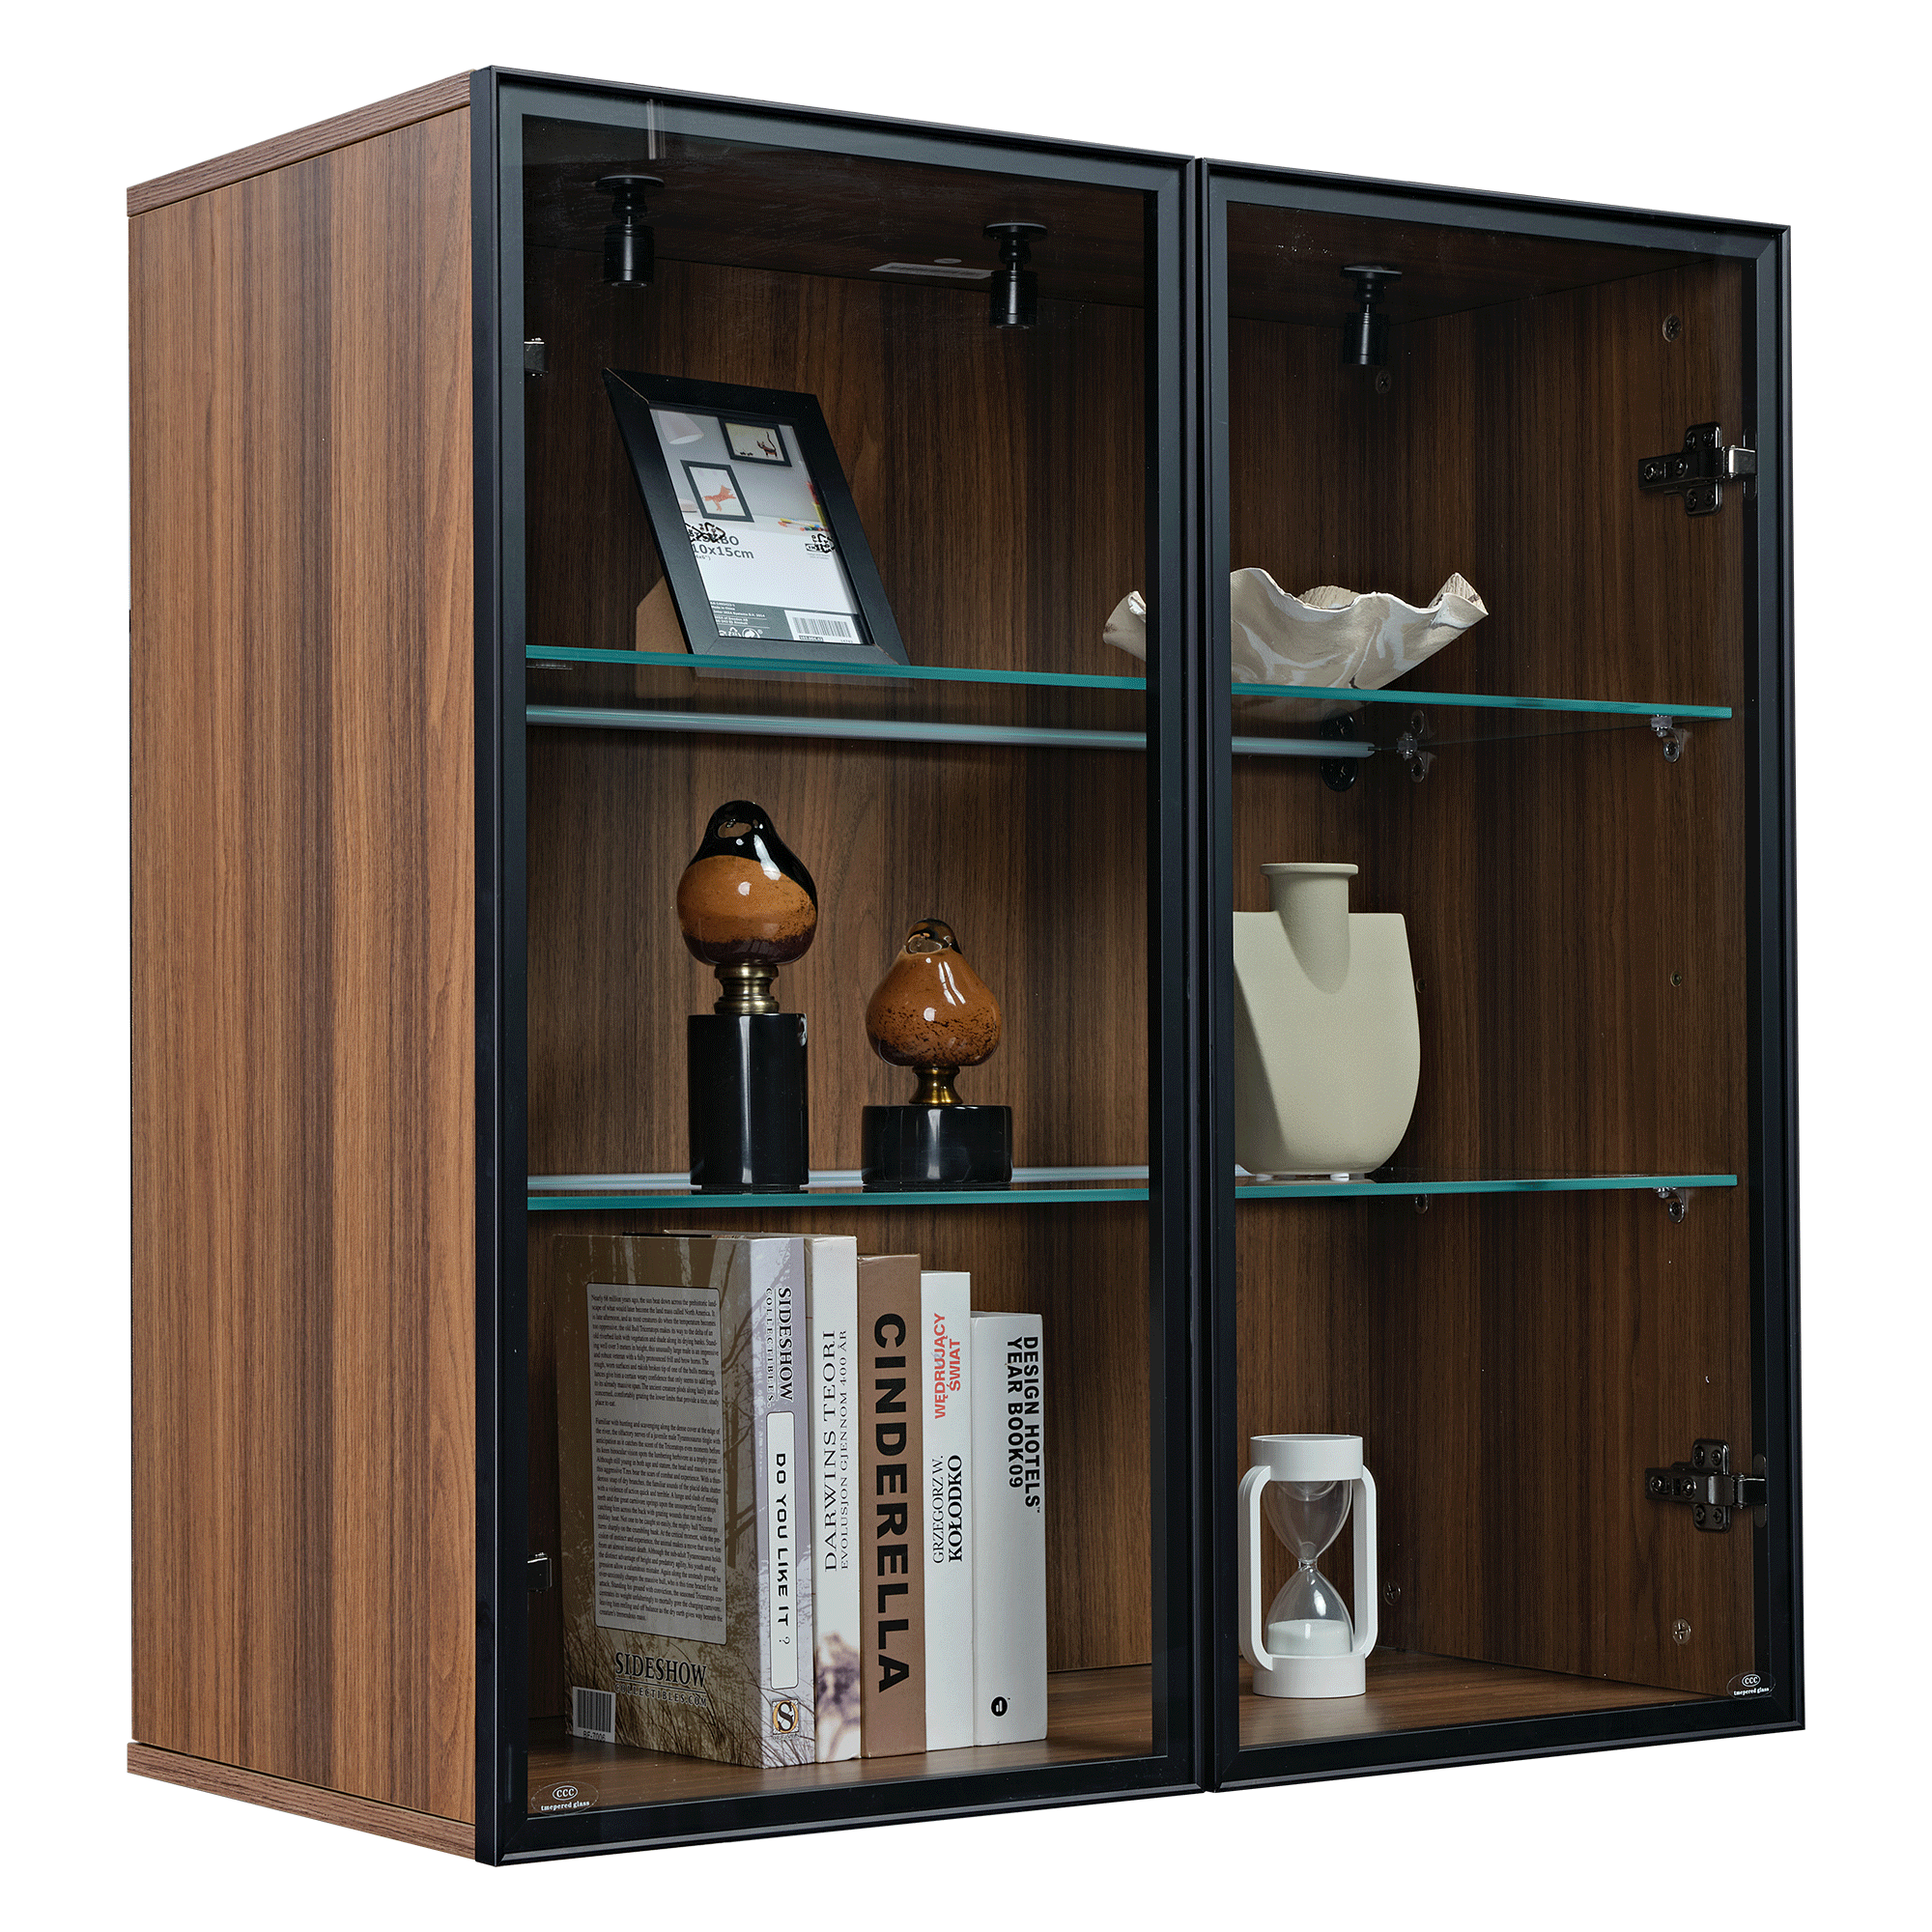 Eureka Wall Mounted Curio Storage Cabinet With Light Control For Bedroom